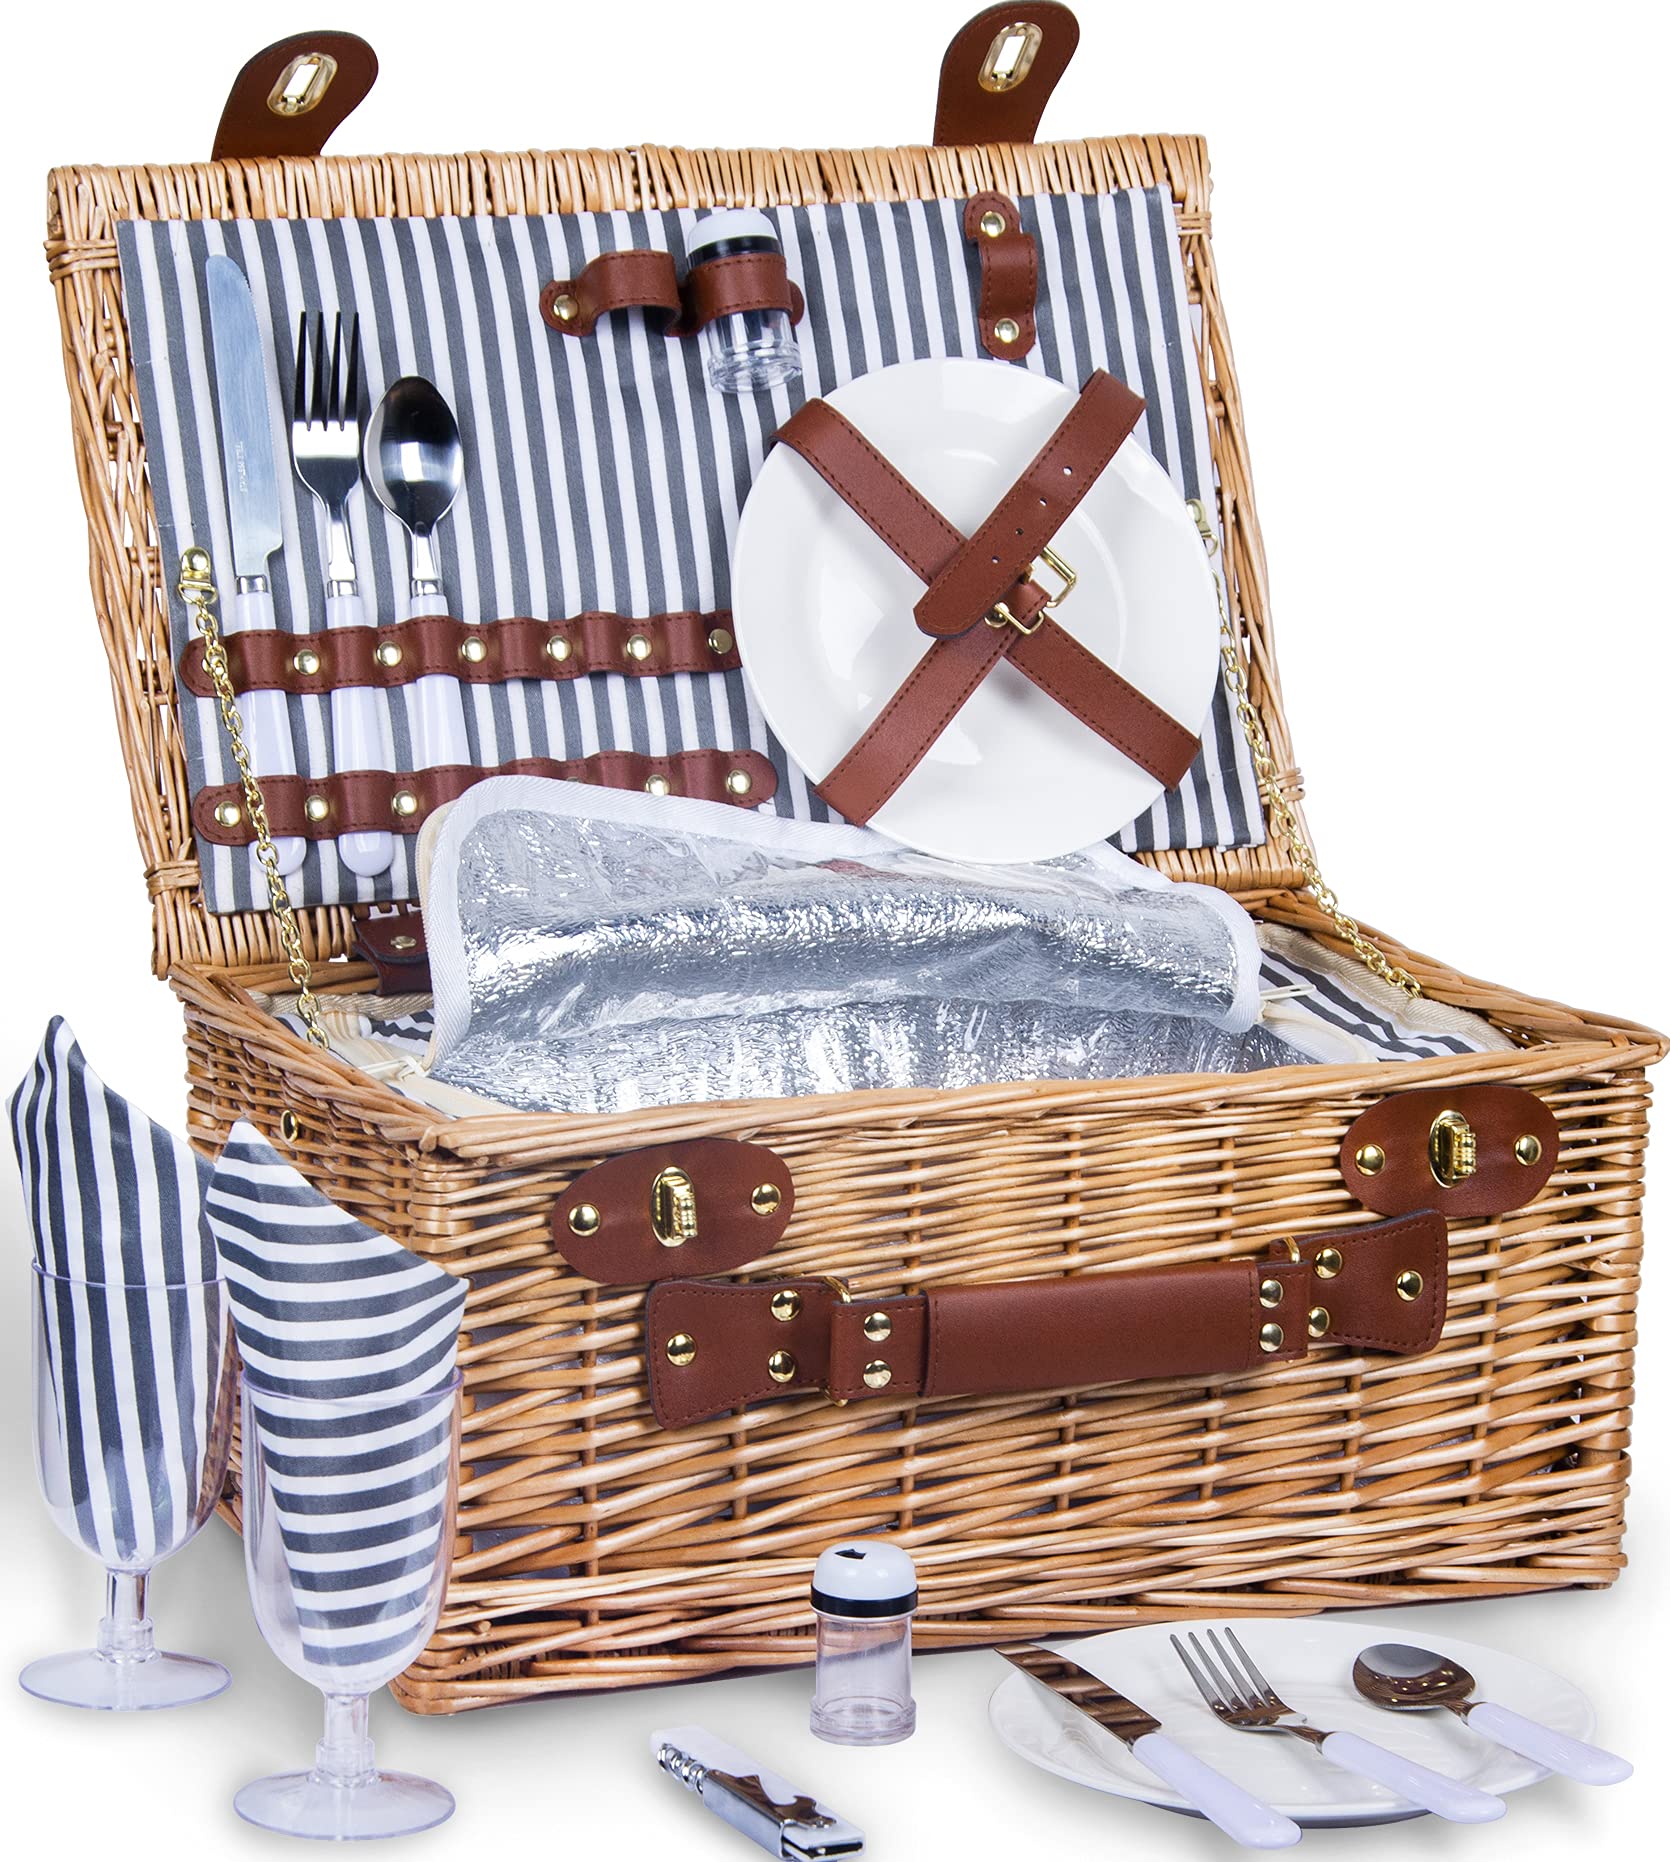 SatisInside UPGRADED INSULATED Deluxe 16Pcs Kit Wicker Picnic Basket Set For 2 People - Reinforced Handle - Grey Stripes